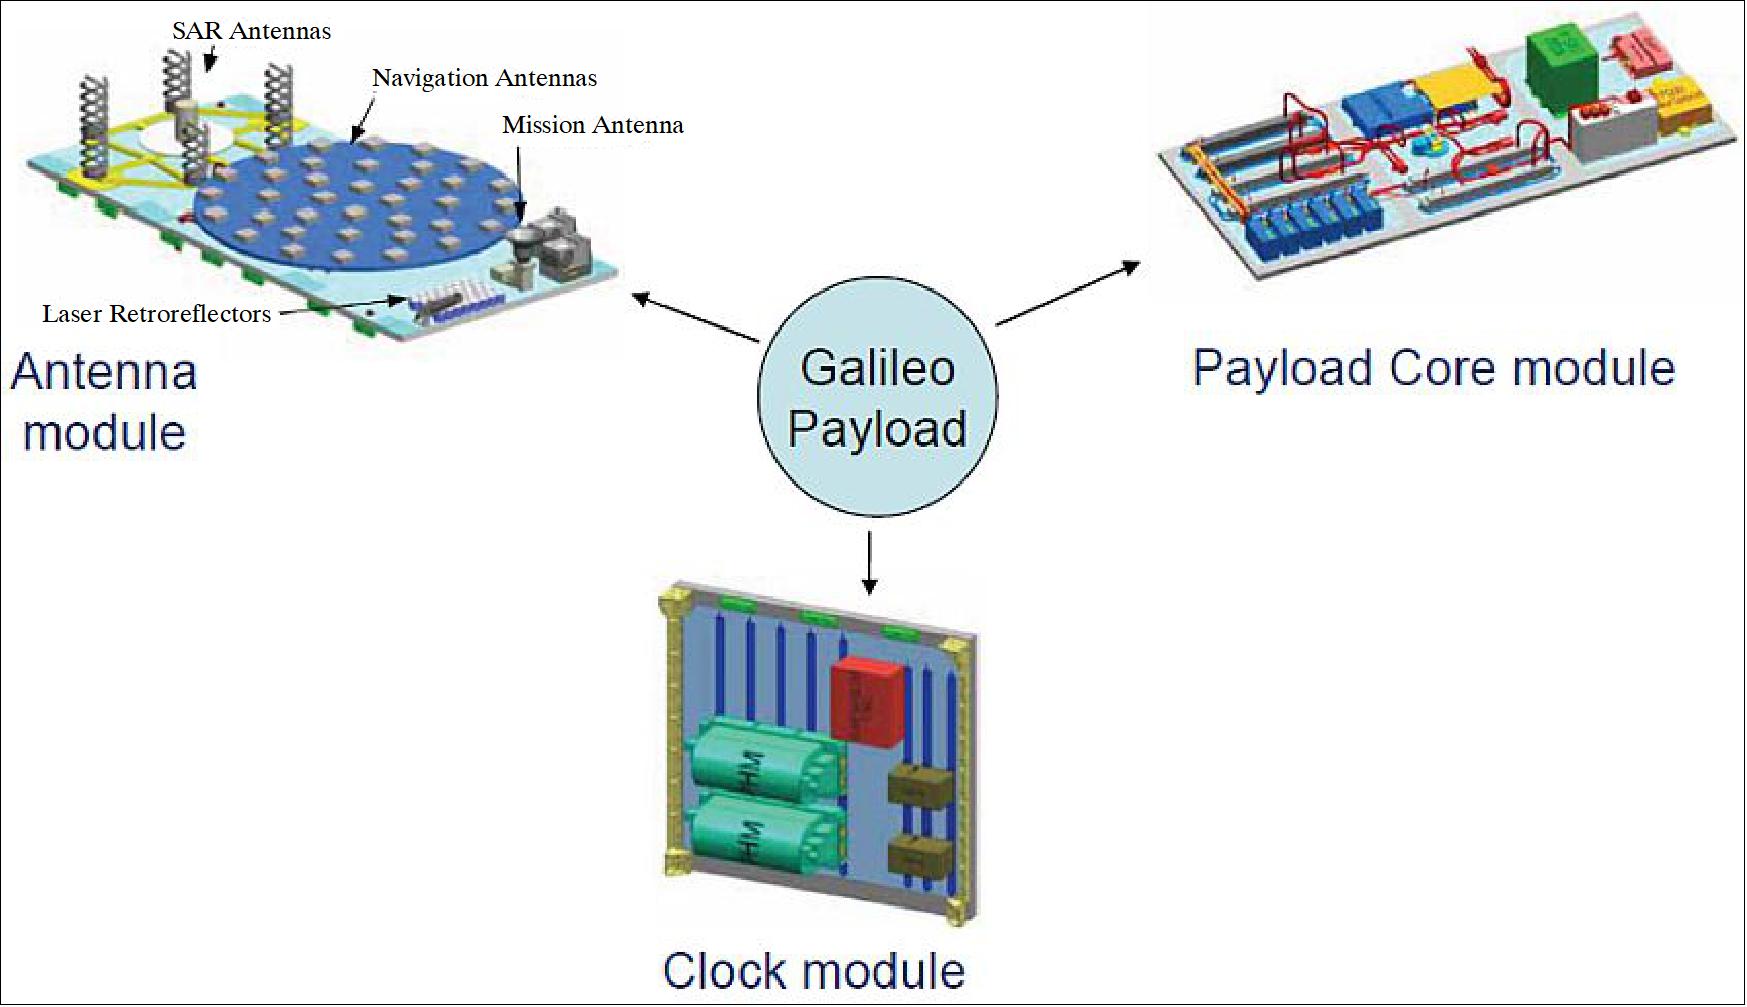 Figure 90: The navigation payload consists of 3 panels per satellite: Clock module, Antenna module, and Core module (image credit: SSTL) 113)